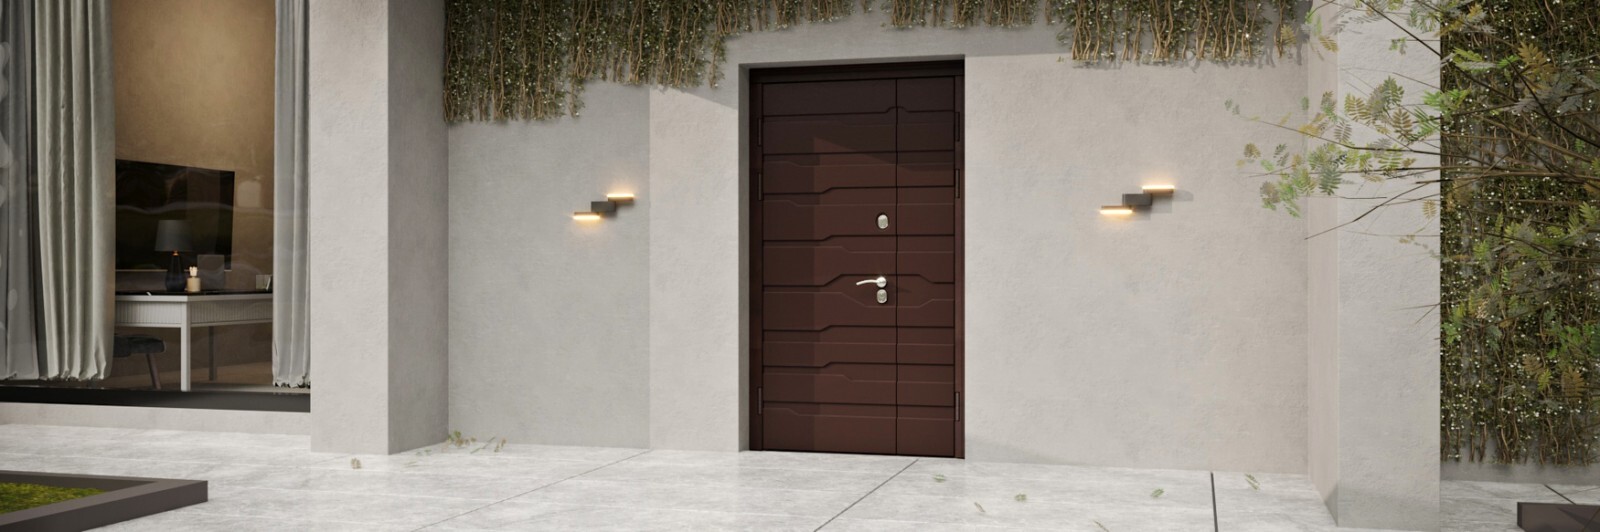 One and a half doors Abwehr Linea photo in the exterior